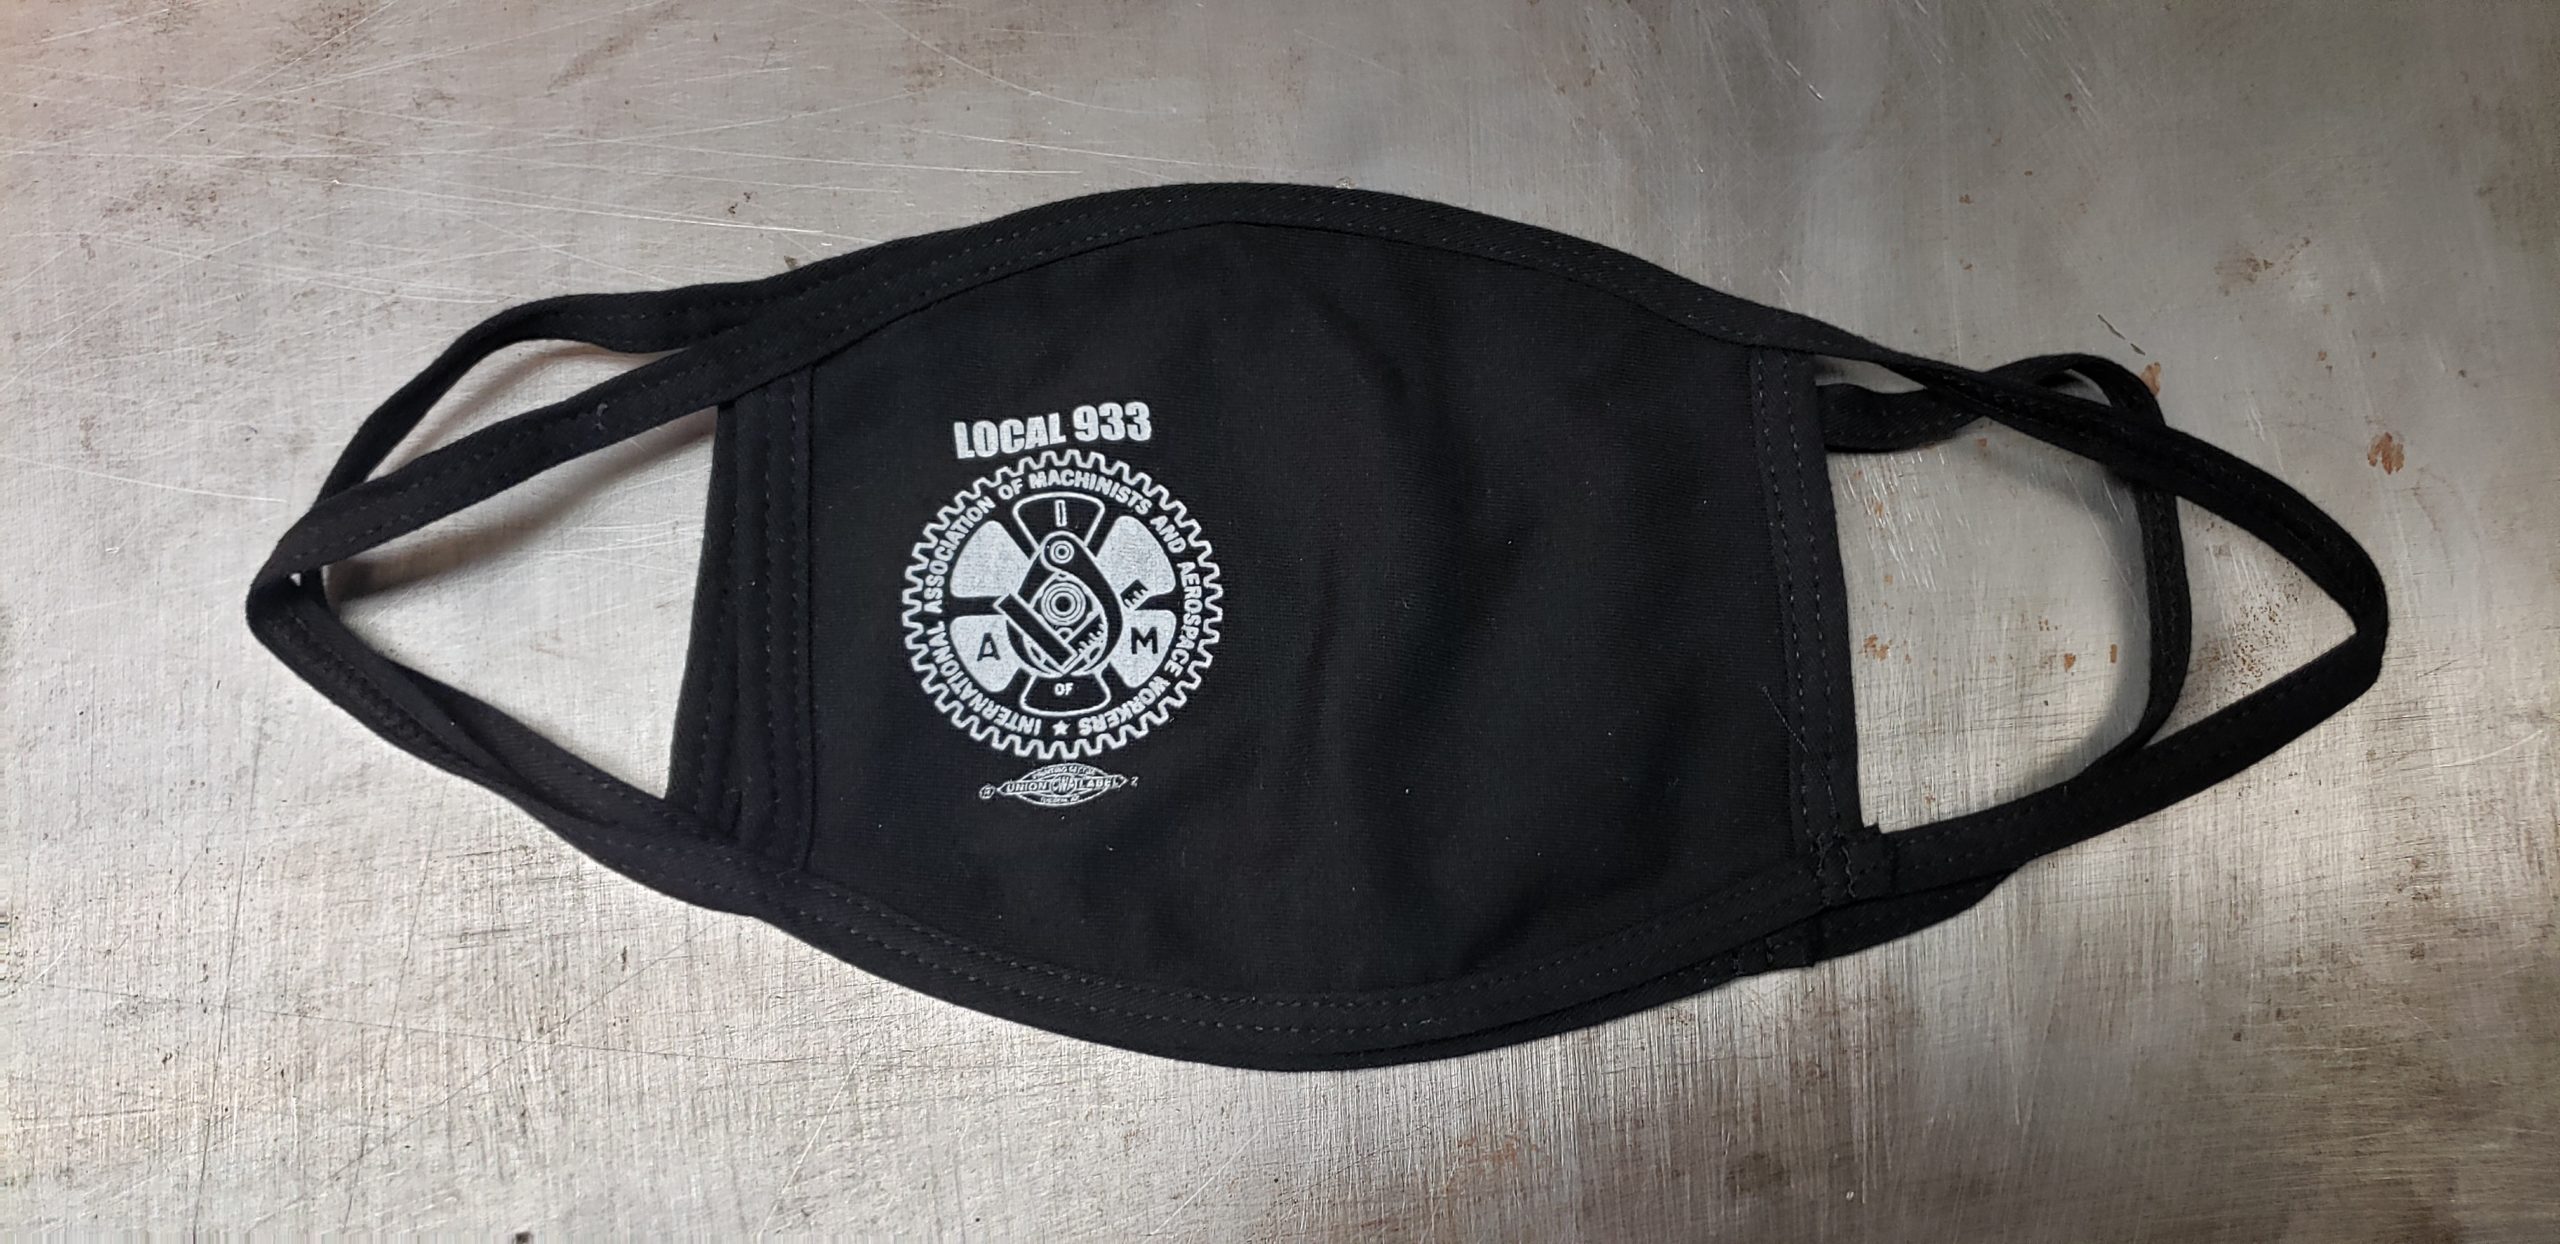 Black cotton face mask with union screen printed one color design featuring the logo of the International Association of Machinists and Aerospace Workers with the text, "LOCAL 933" above it